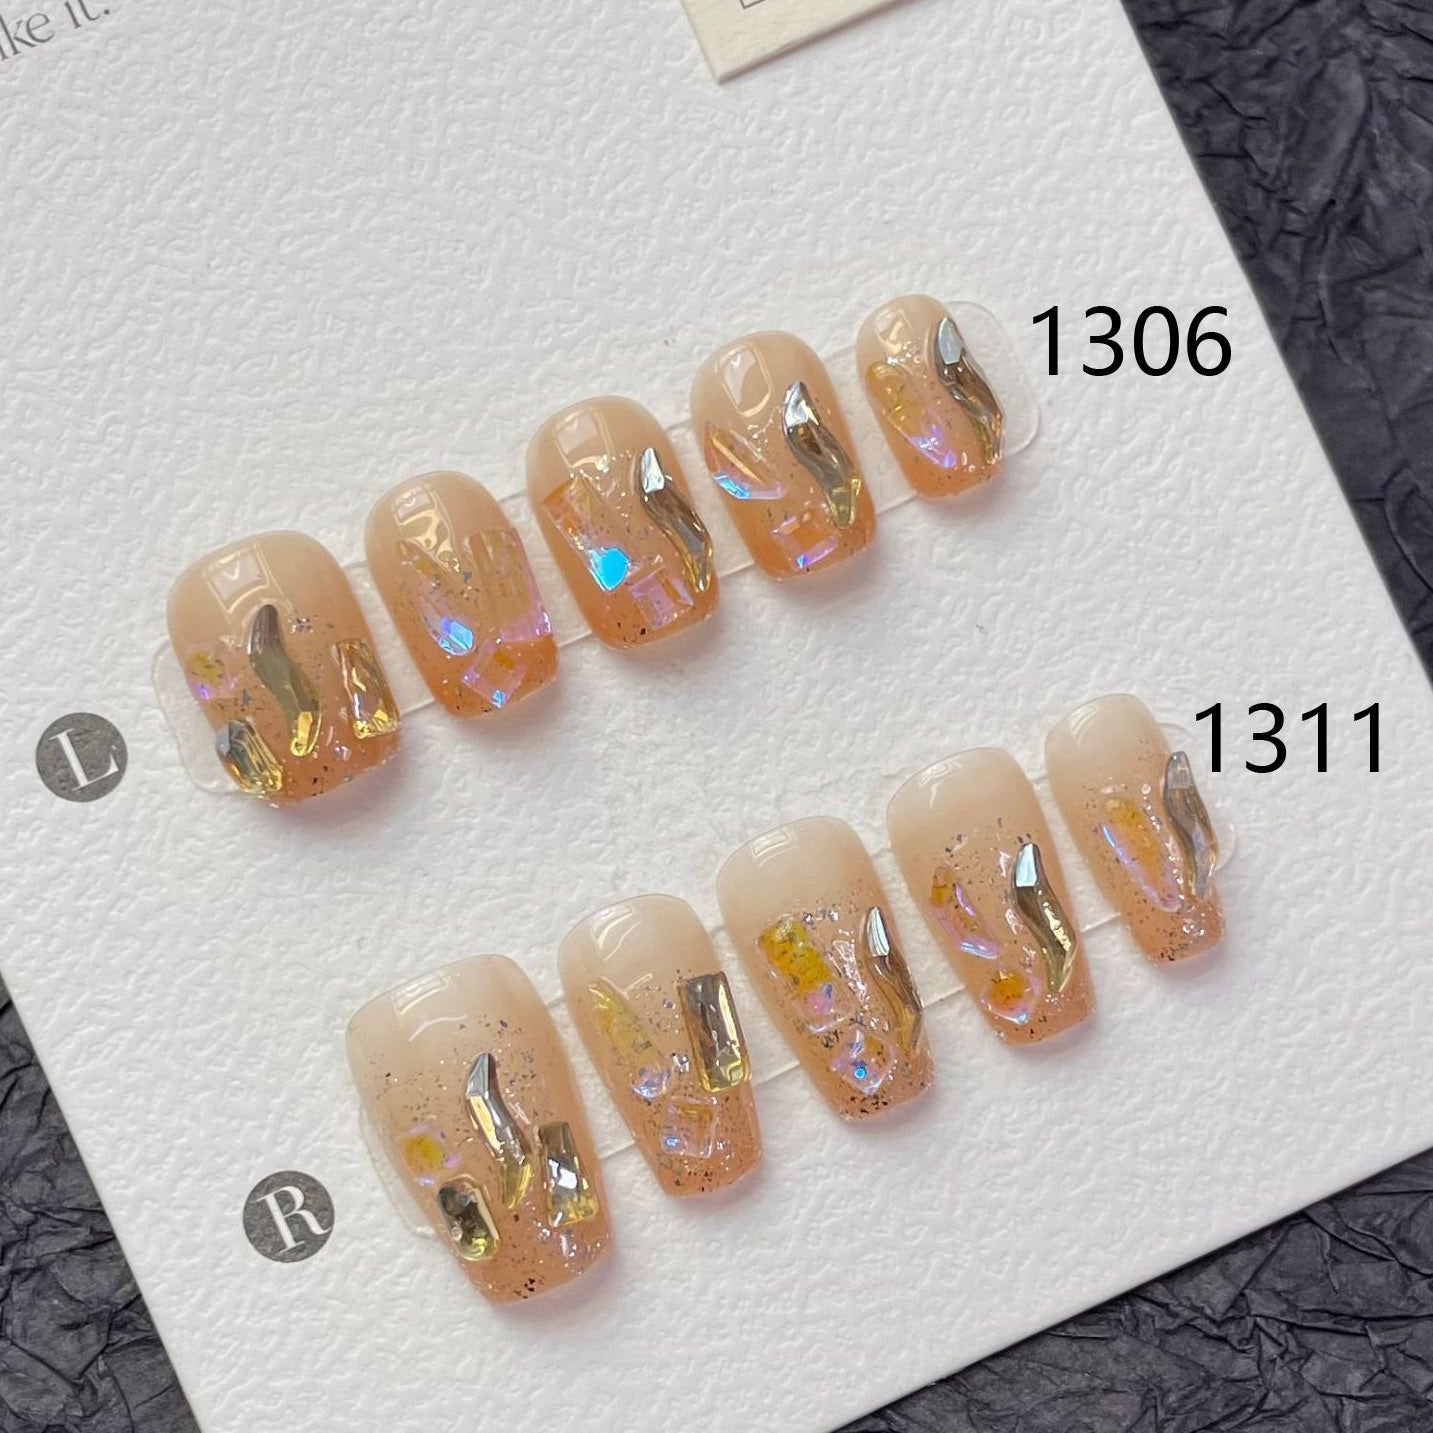 1306/1311 Champagne aurora style press on nails 100% handmade false nails nude color